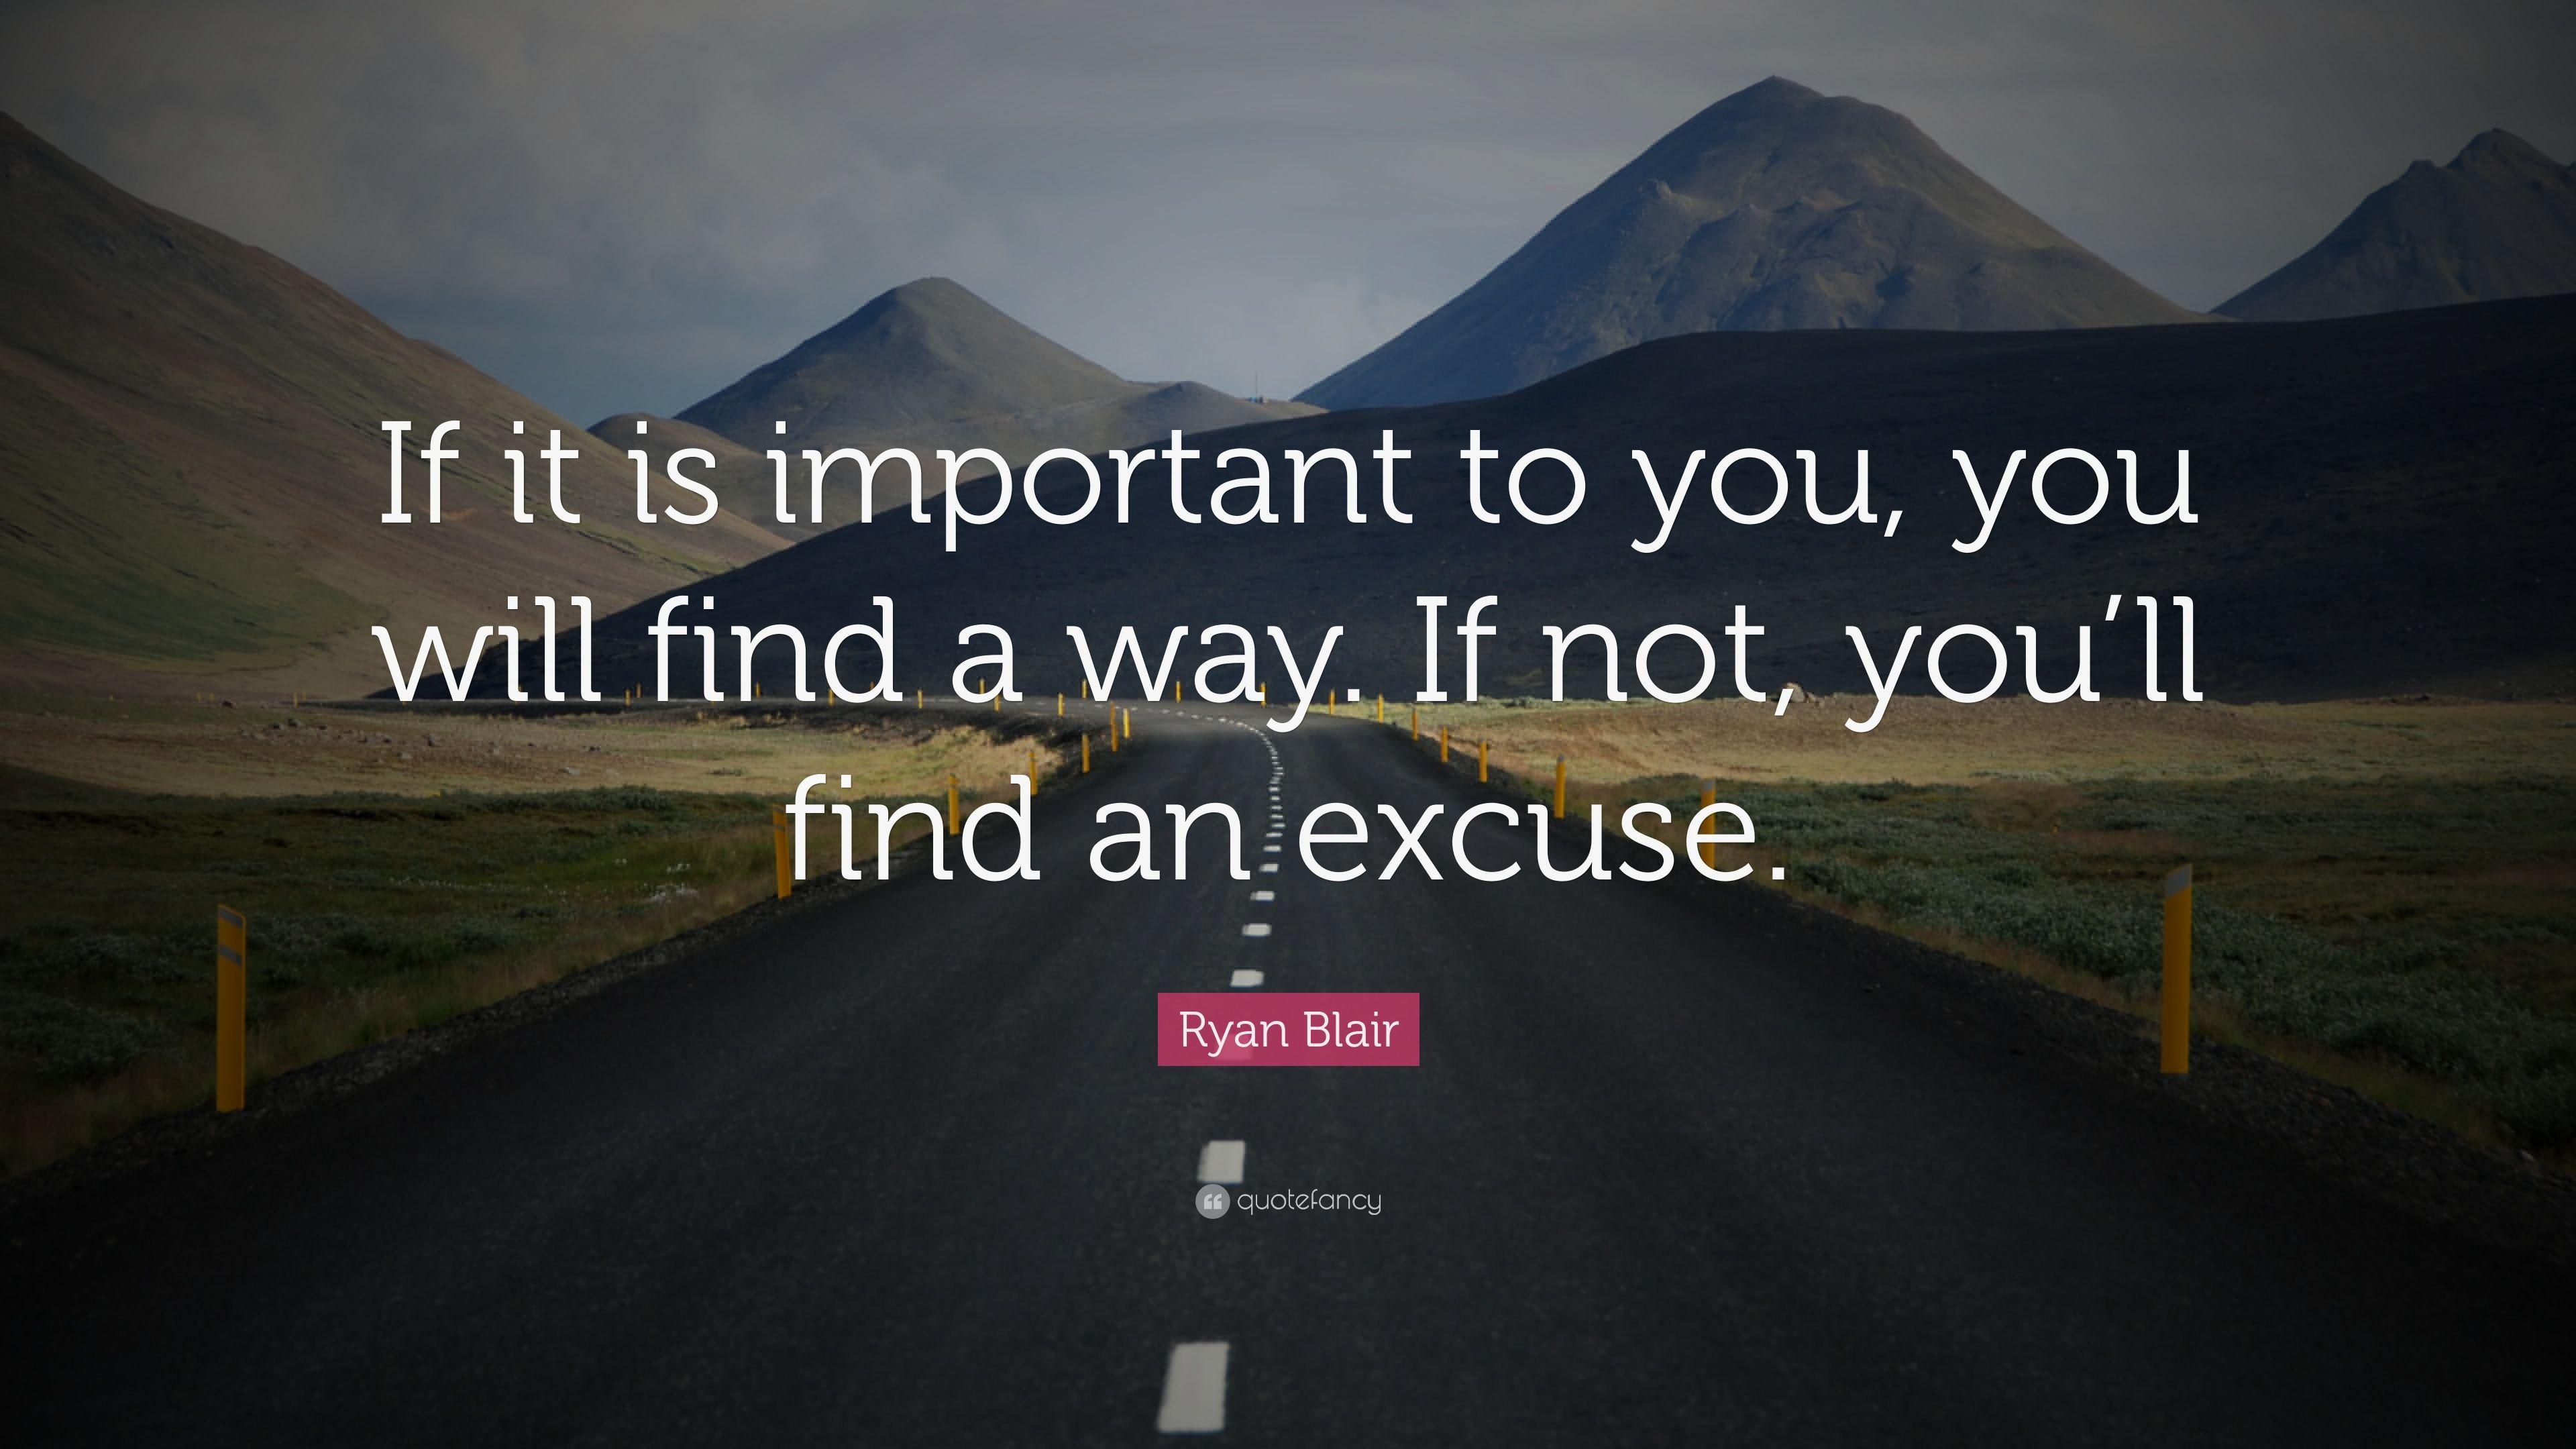 Ryan Blair Quote: "If it is important to you, you will find a way 